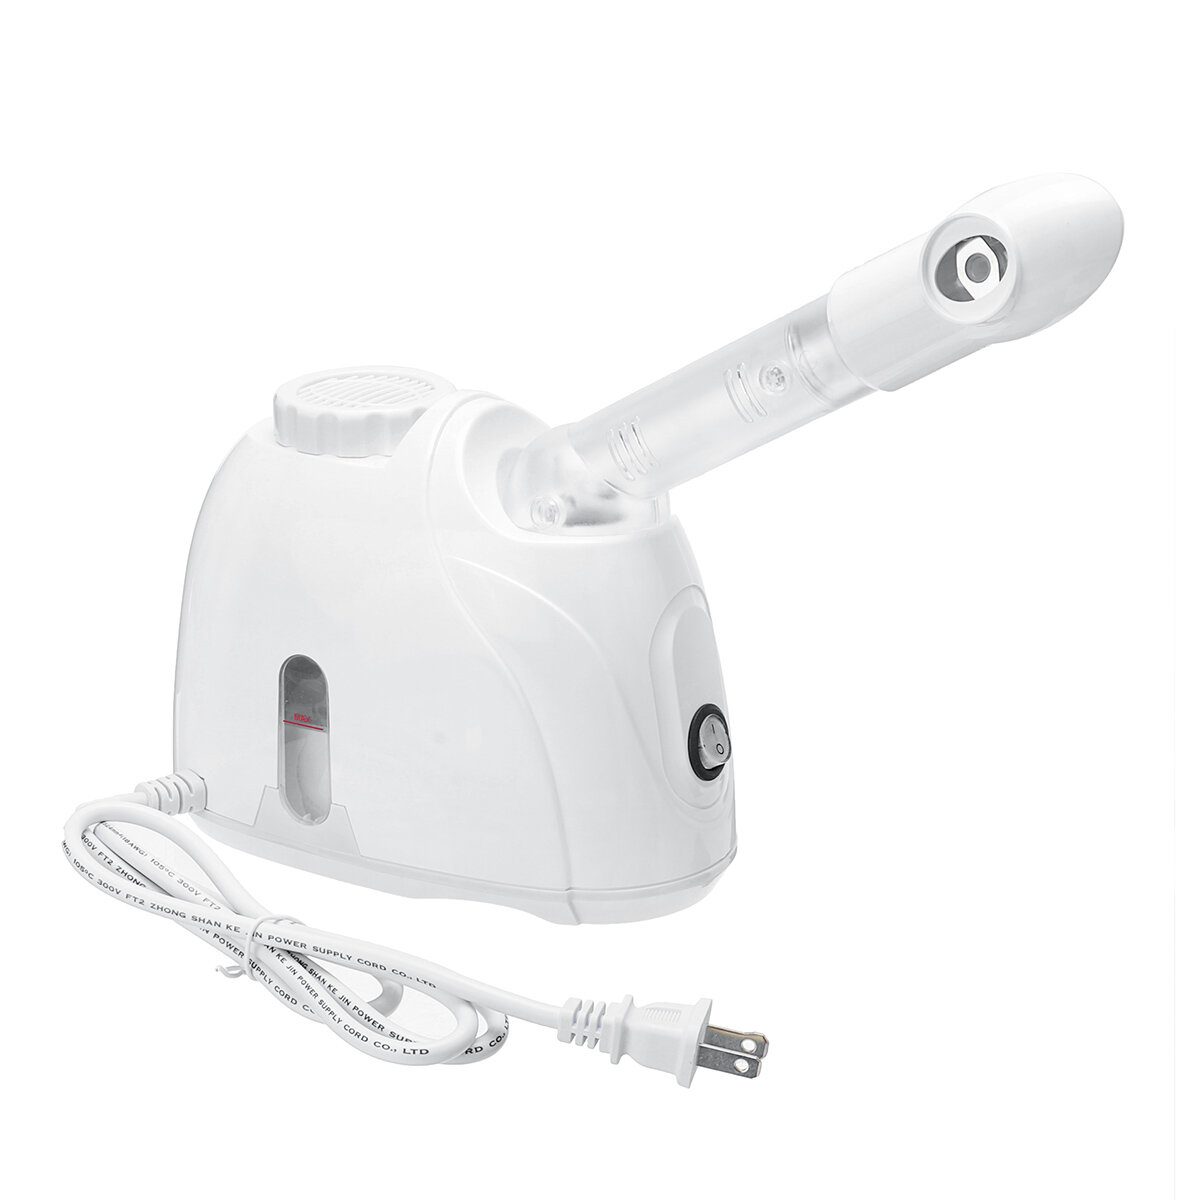 

3-in-1 Hot Mist Steam Facial Steamer 360° Rotation Aromatherapy Facial Sprayer Large Capacity SPA Skin Beauty Instrument